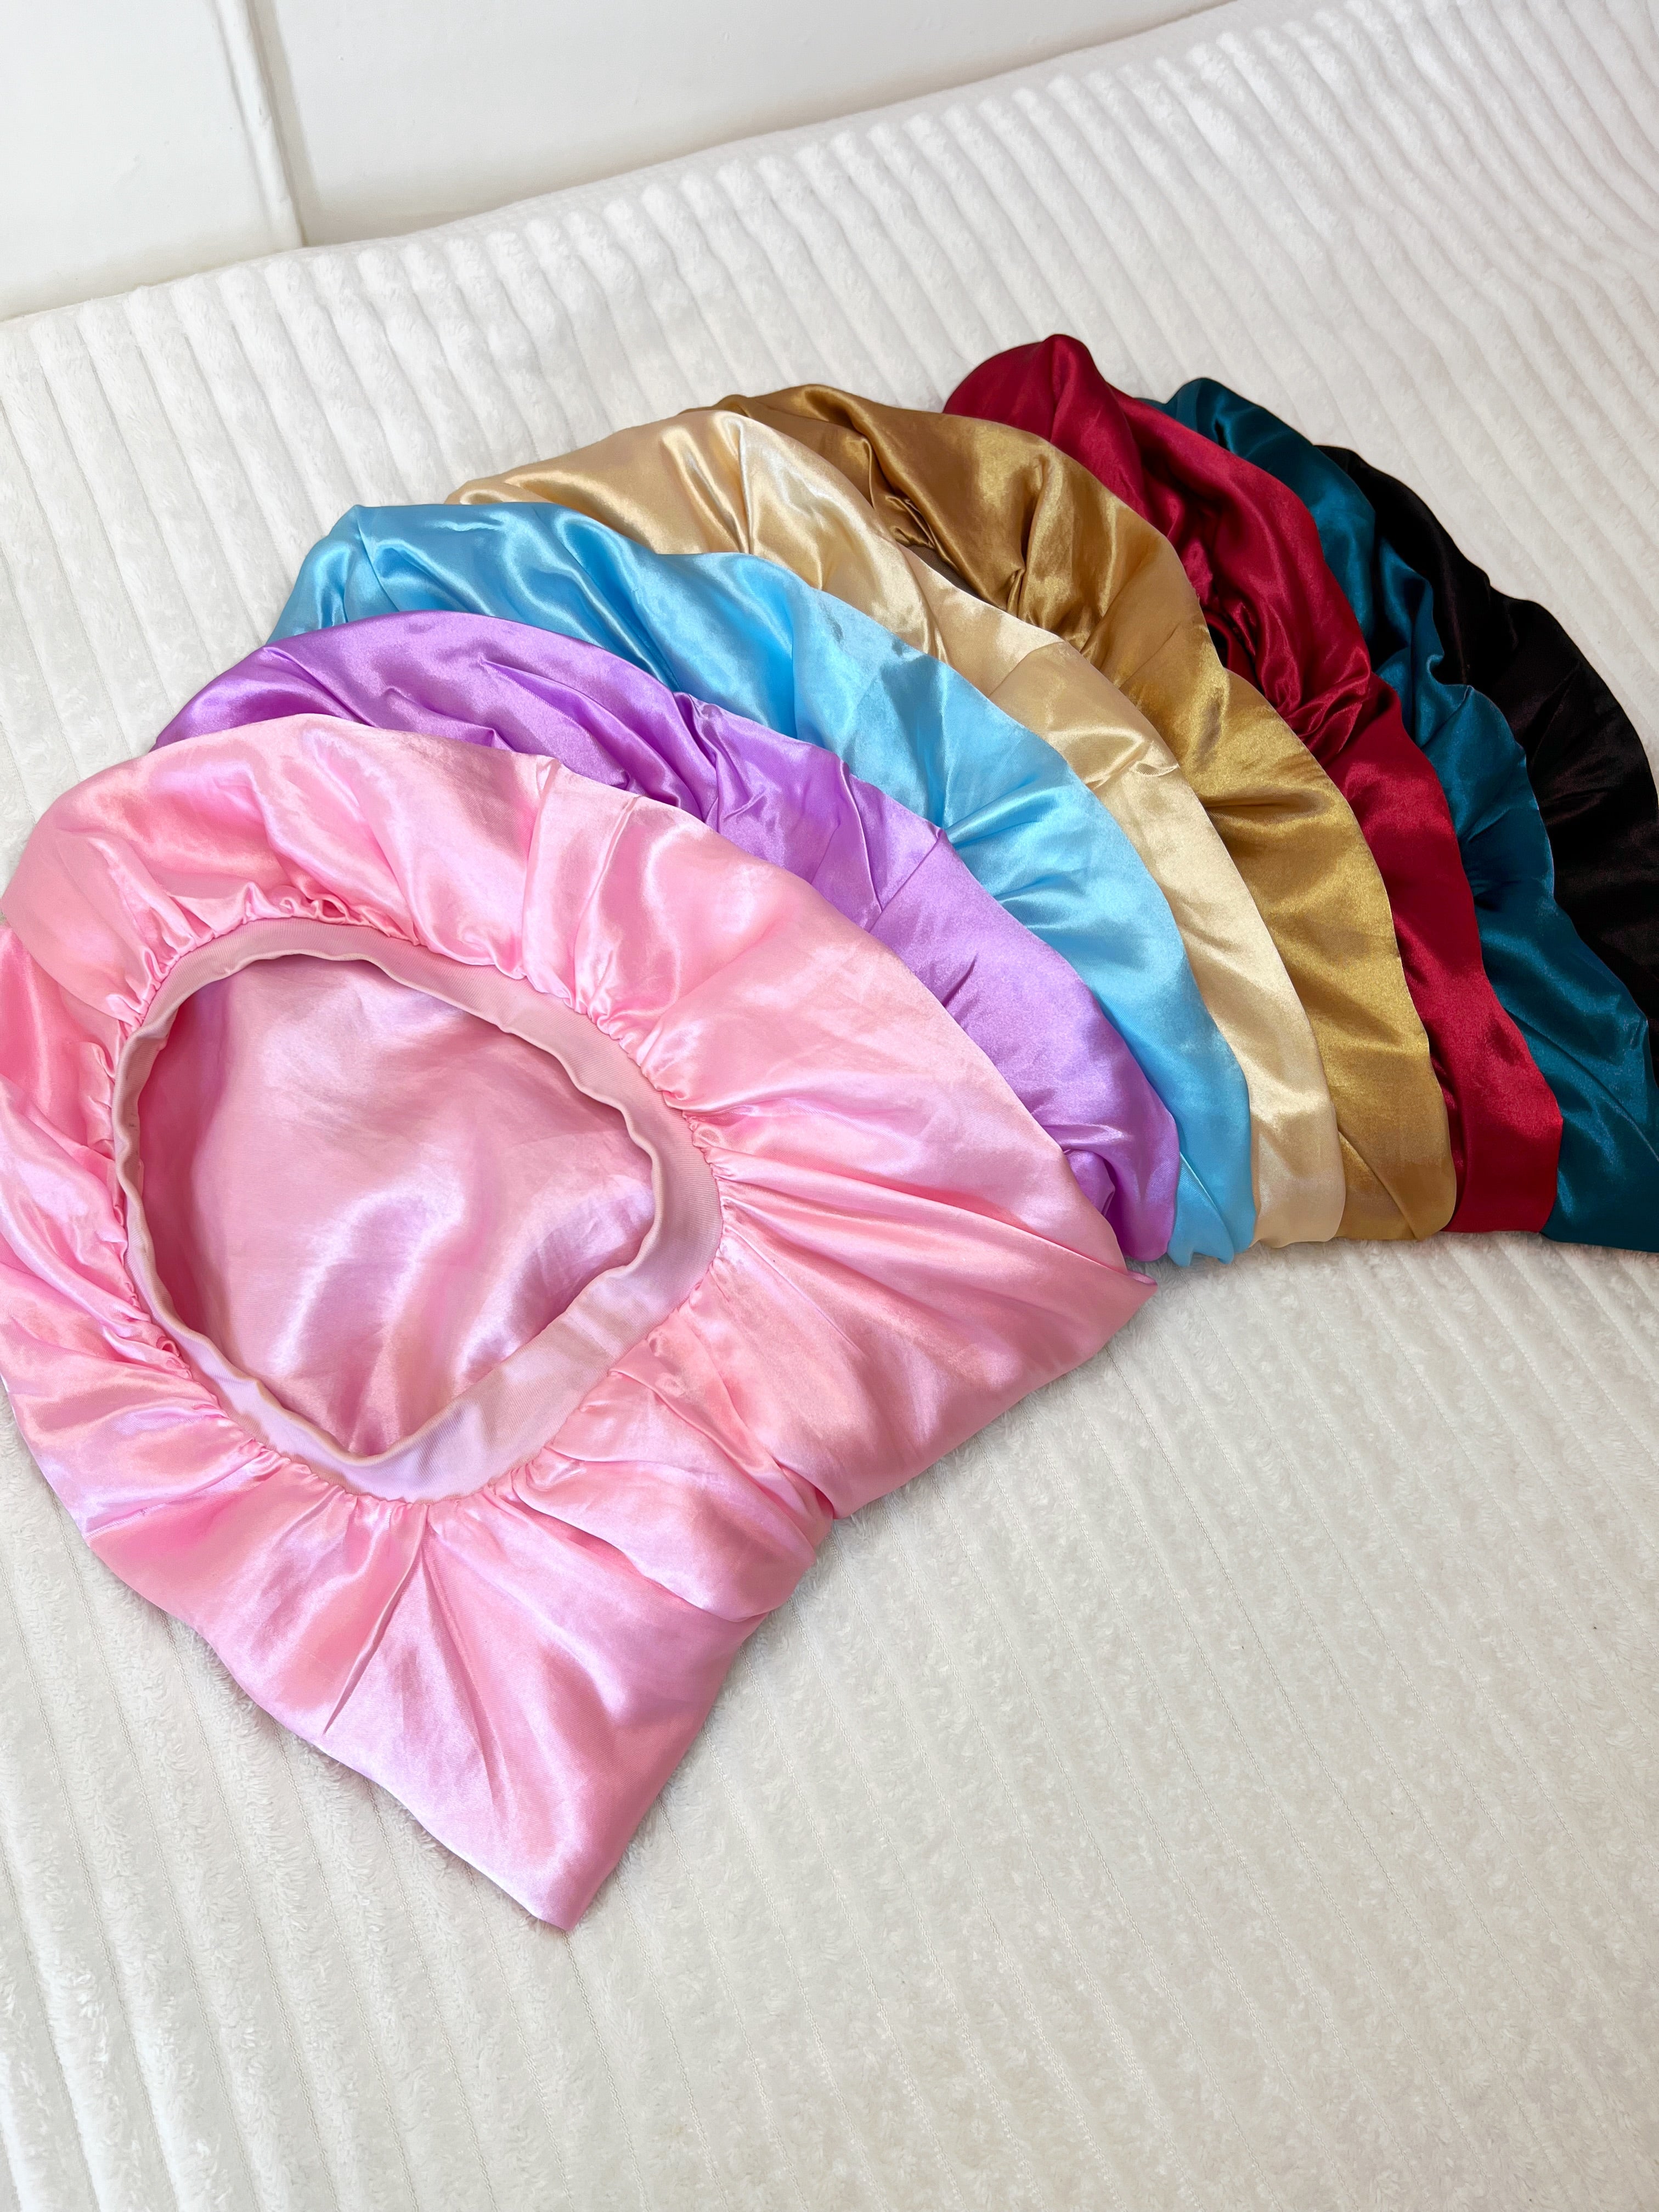 Hair bonnets: How to protect your hair at night for smooth, frizz-free hair in the morning